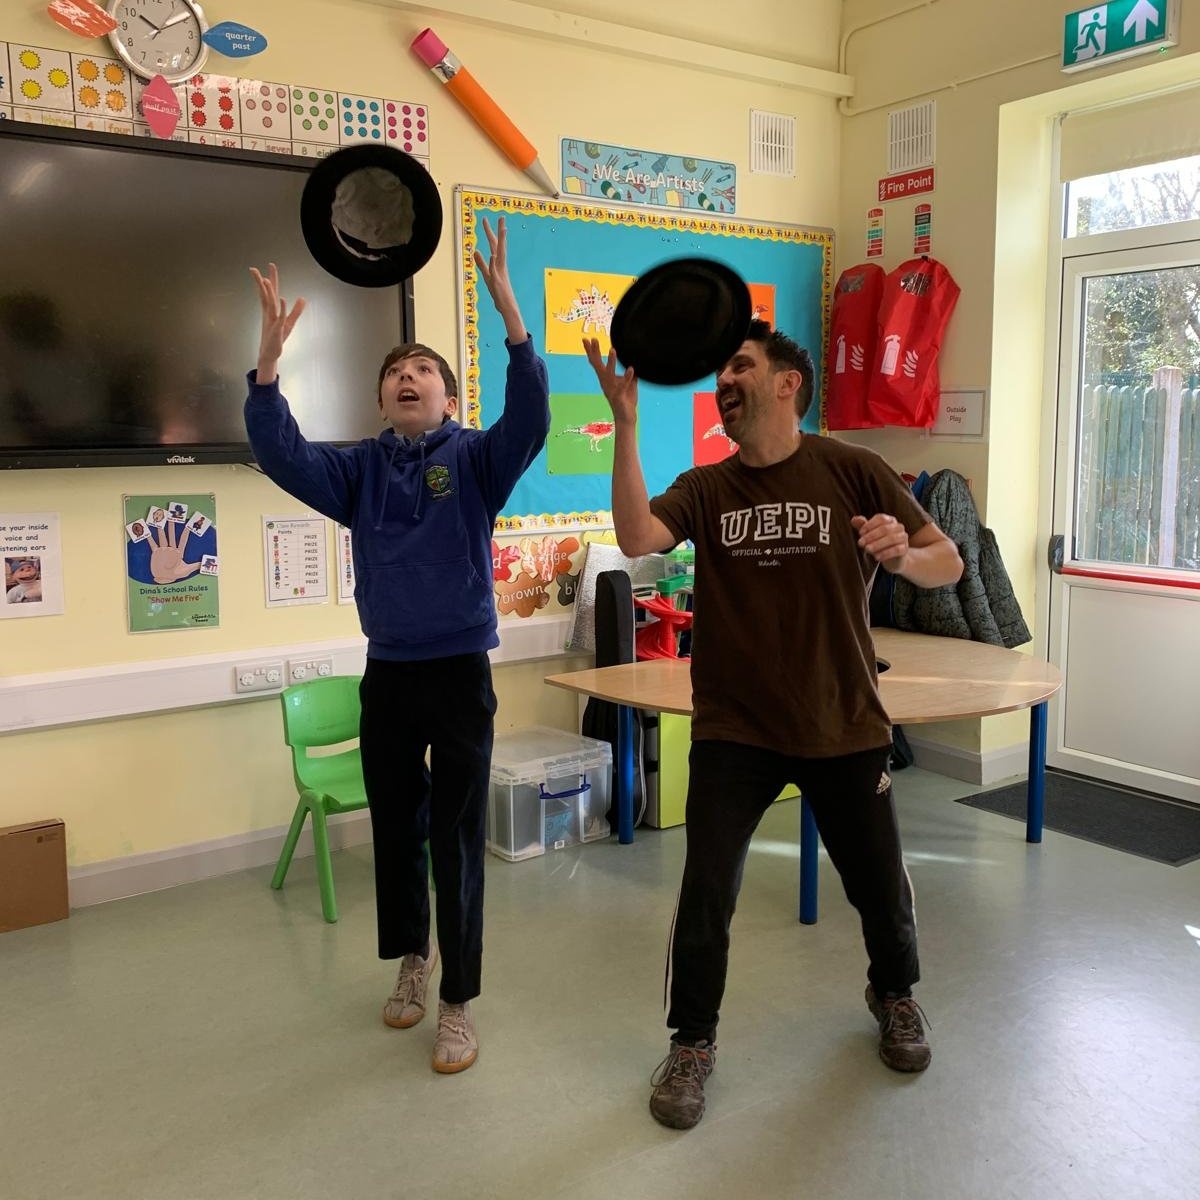 Artist Miquel Barceló in action at Castlegar National School delivering a Clown Workshop as part of the Branar sa Scoil programme.

Branar sa Scoil is a curated arts programme which is currently taking place in four DEIS primary schools in Galway city and county.